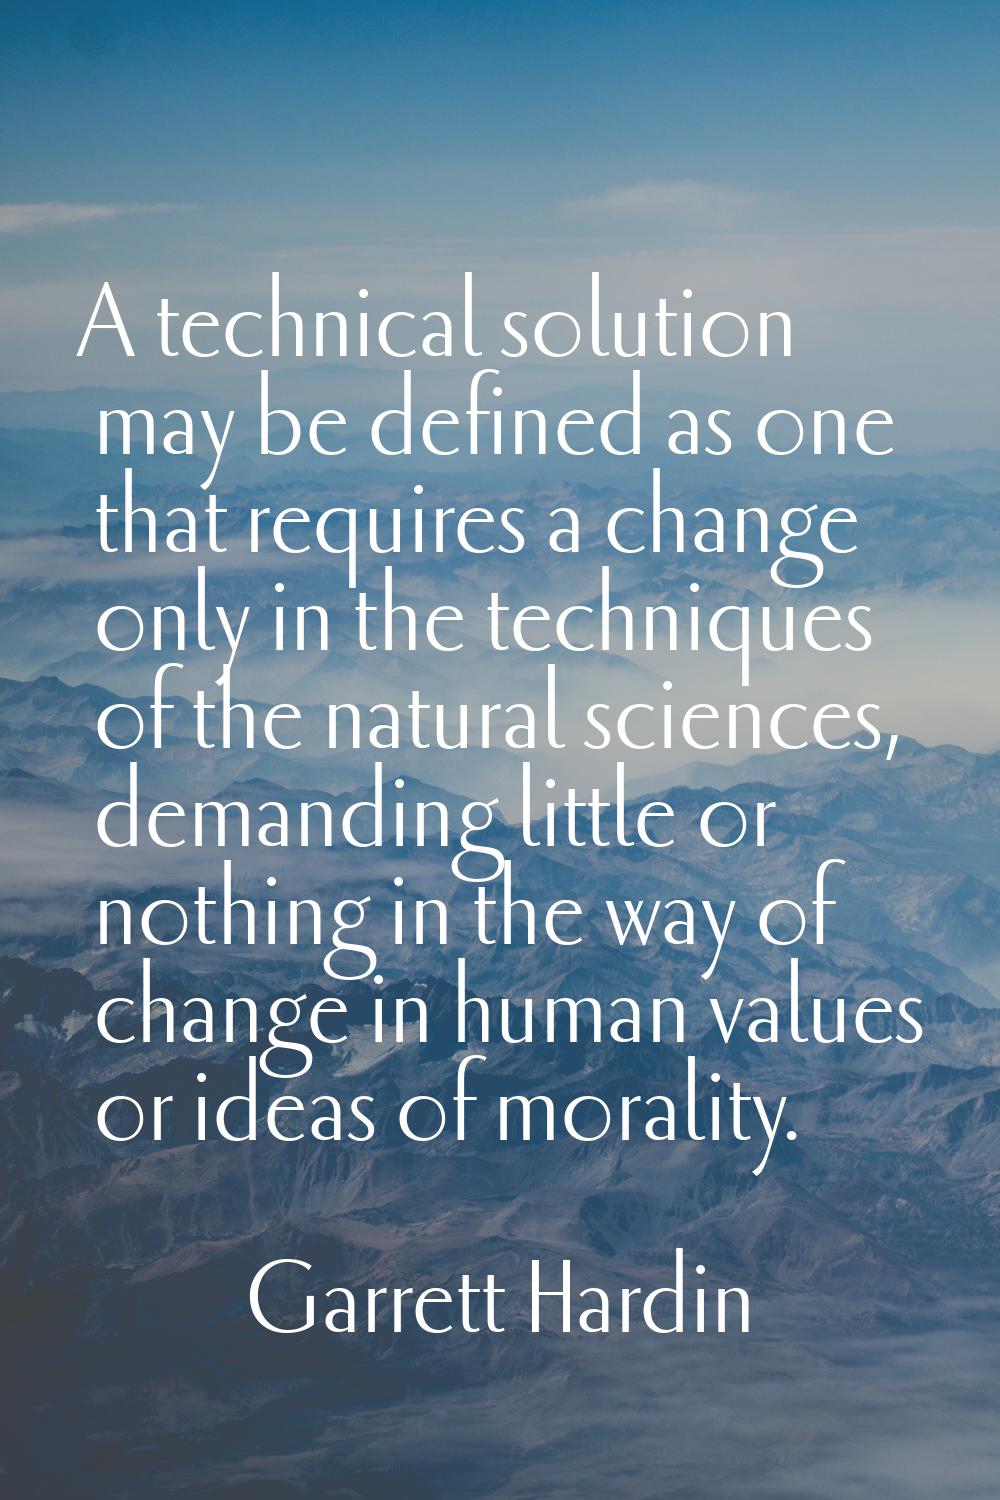 A technical solution may be defined as one that requires a change only in the techniques of the nat